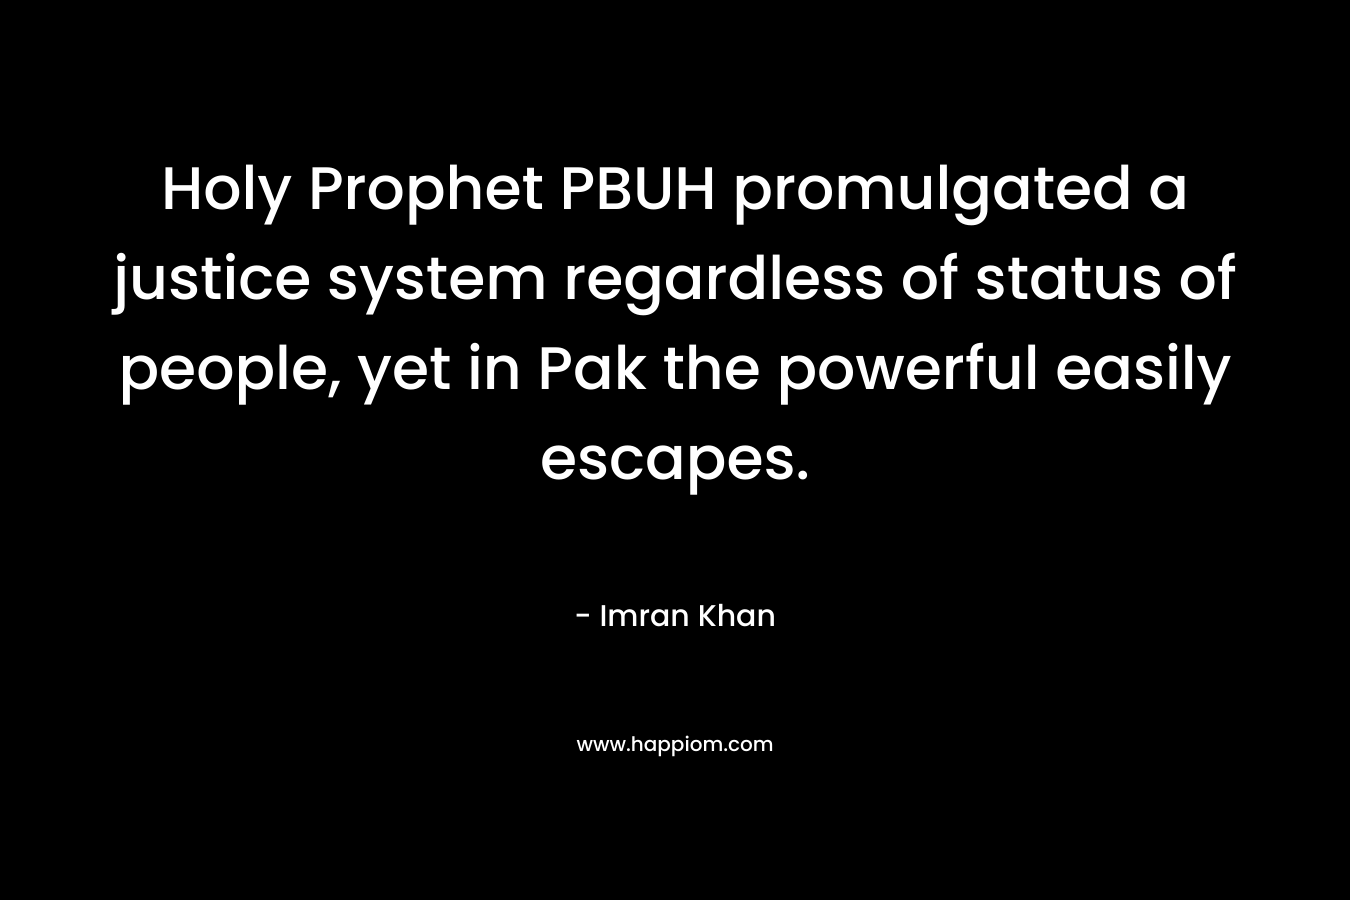 Holy Prophet PBUH promulgated a justice system regardless of status of people, yet in Pak the powerful easily escapes.